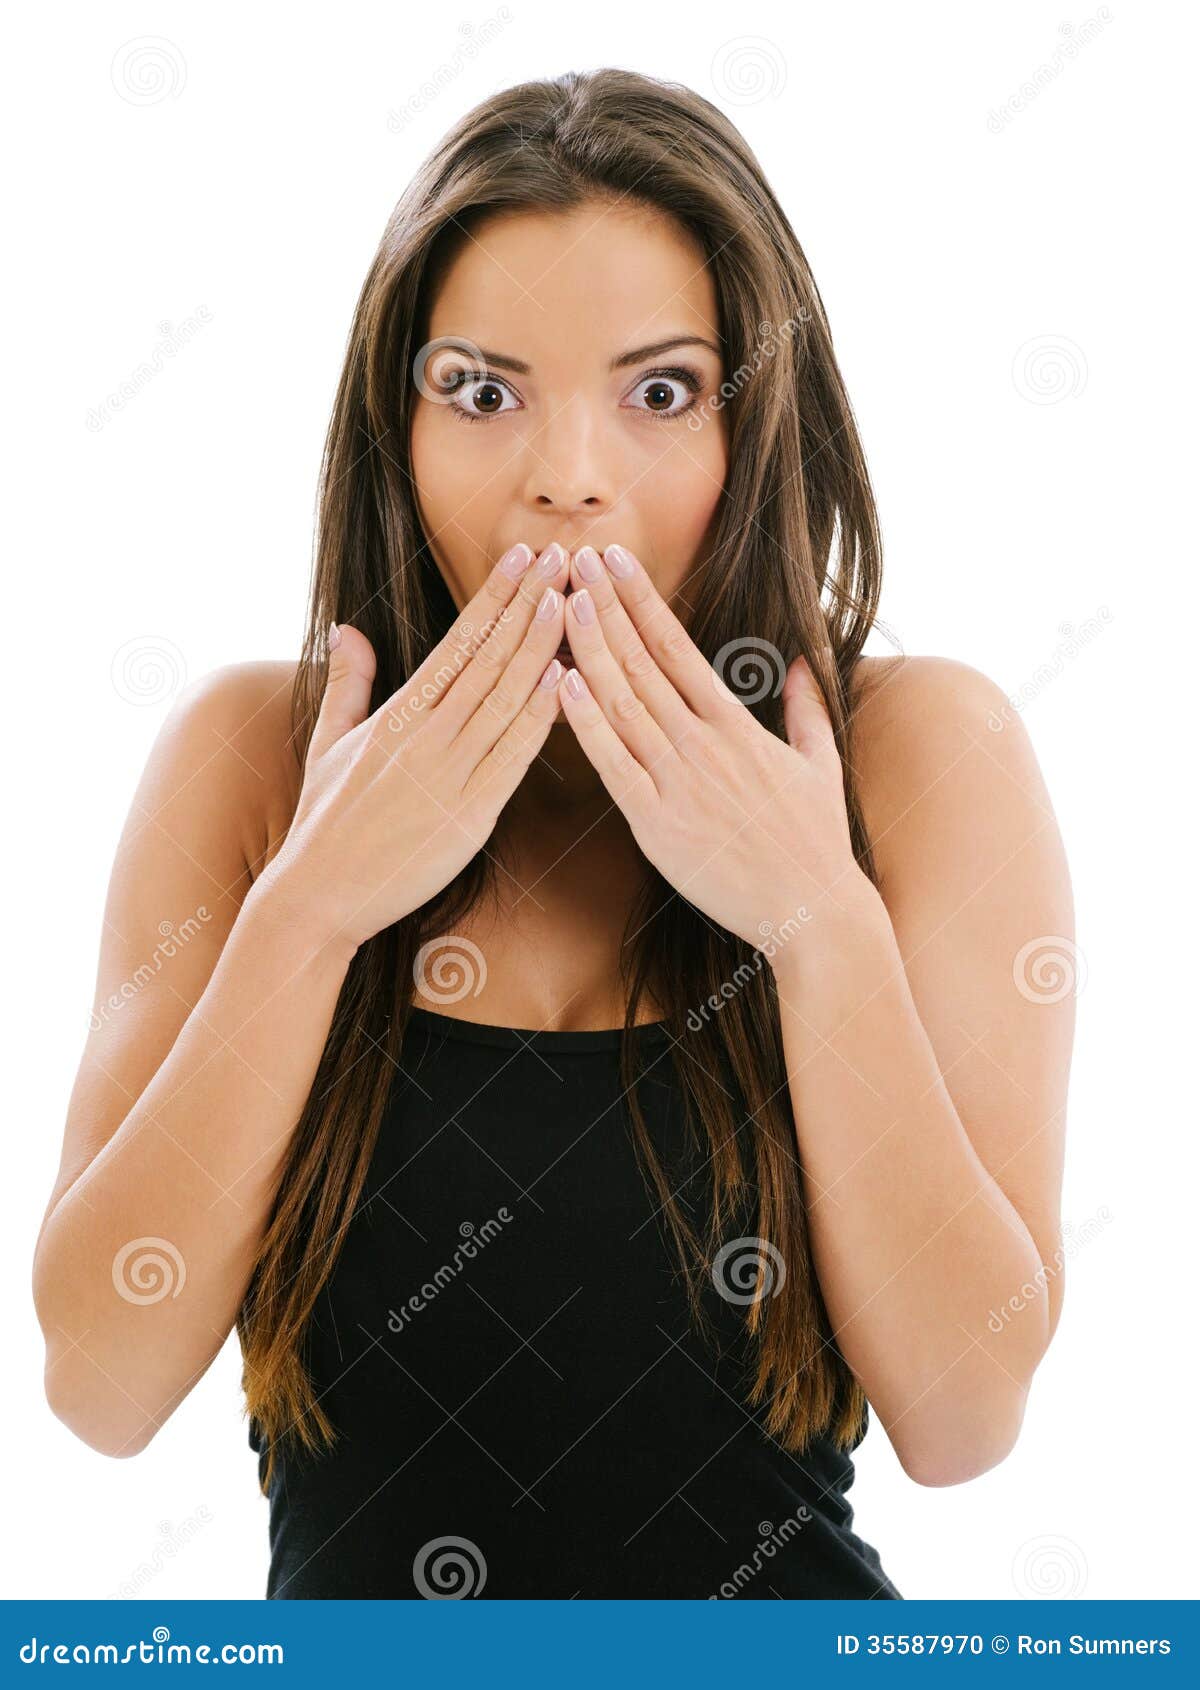 Young woman surprised stock photo. Image of model, excited - 35587970